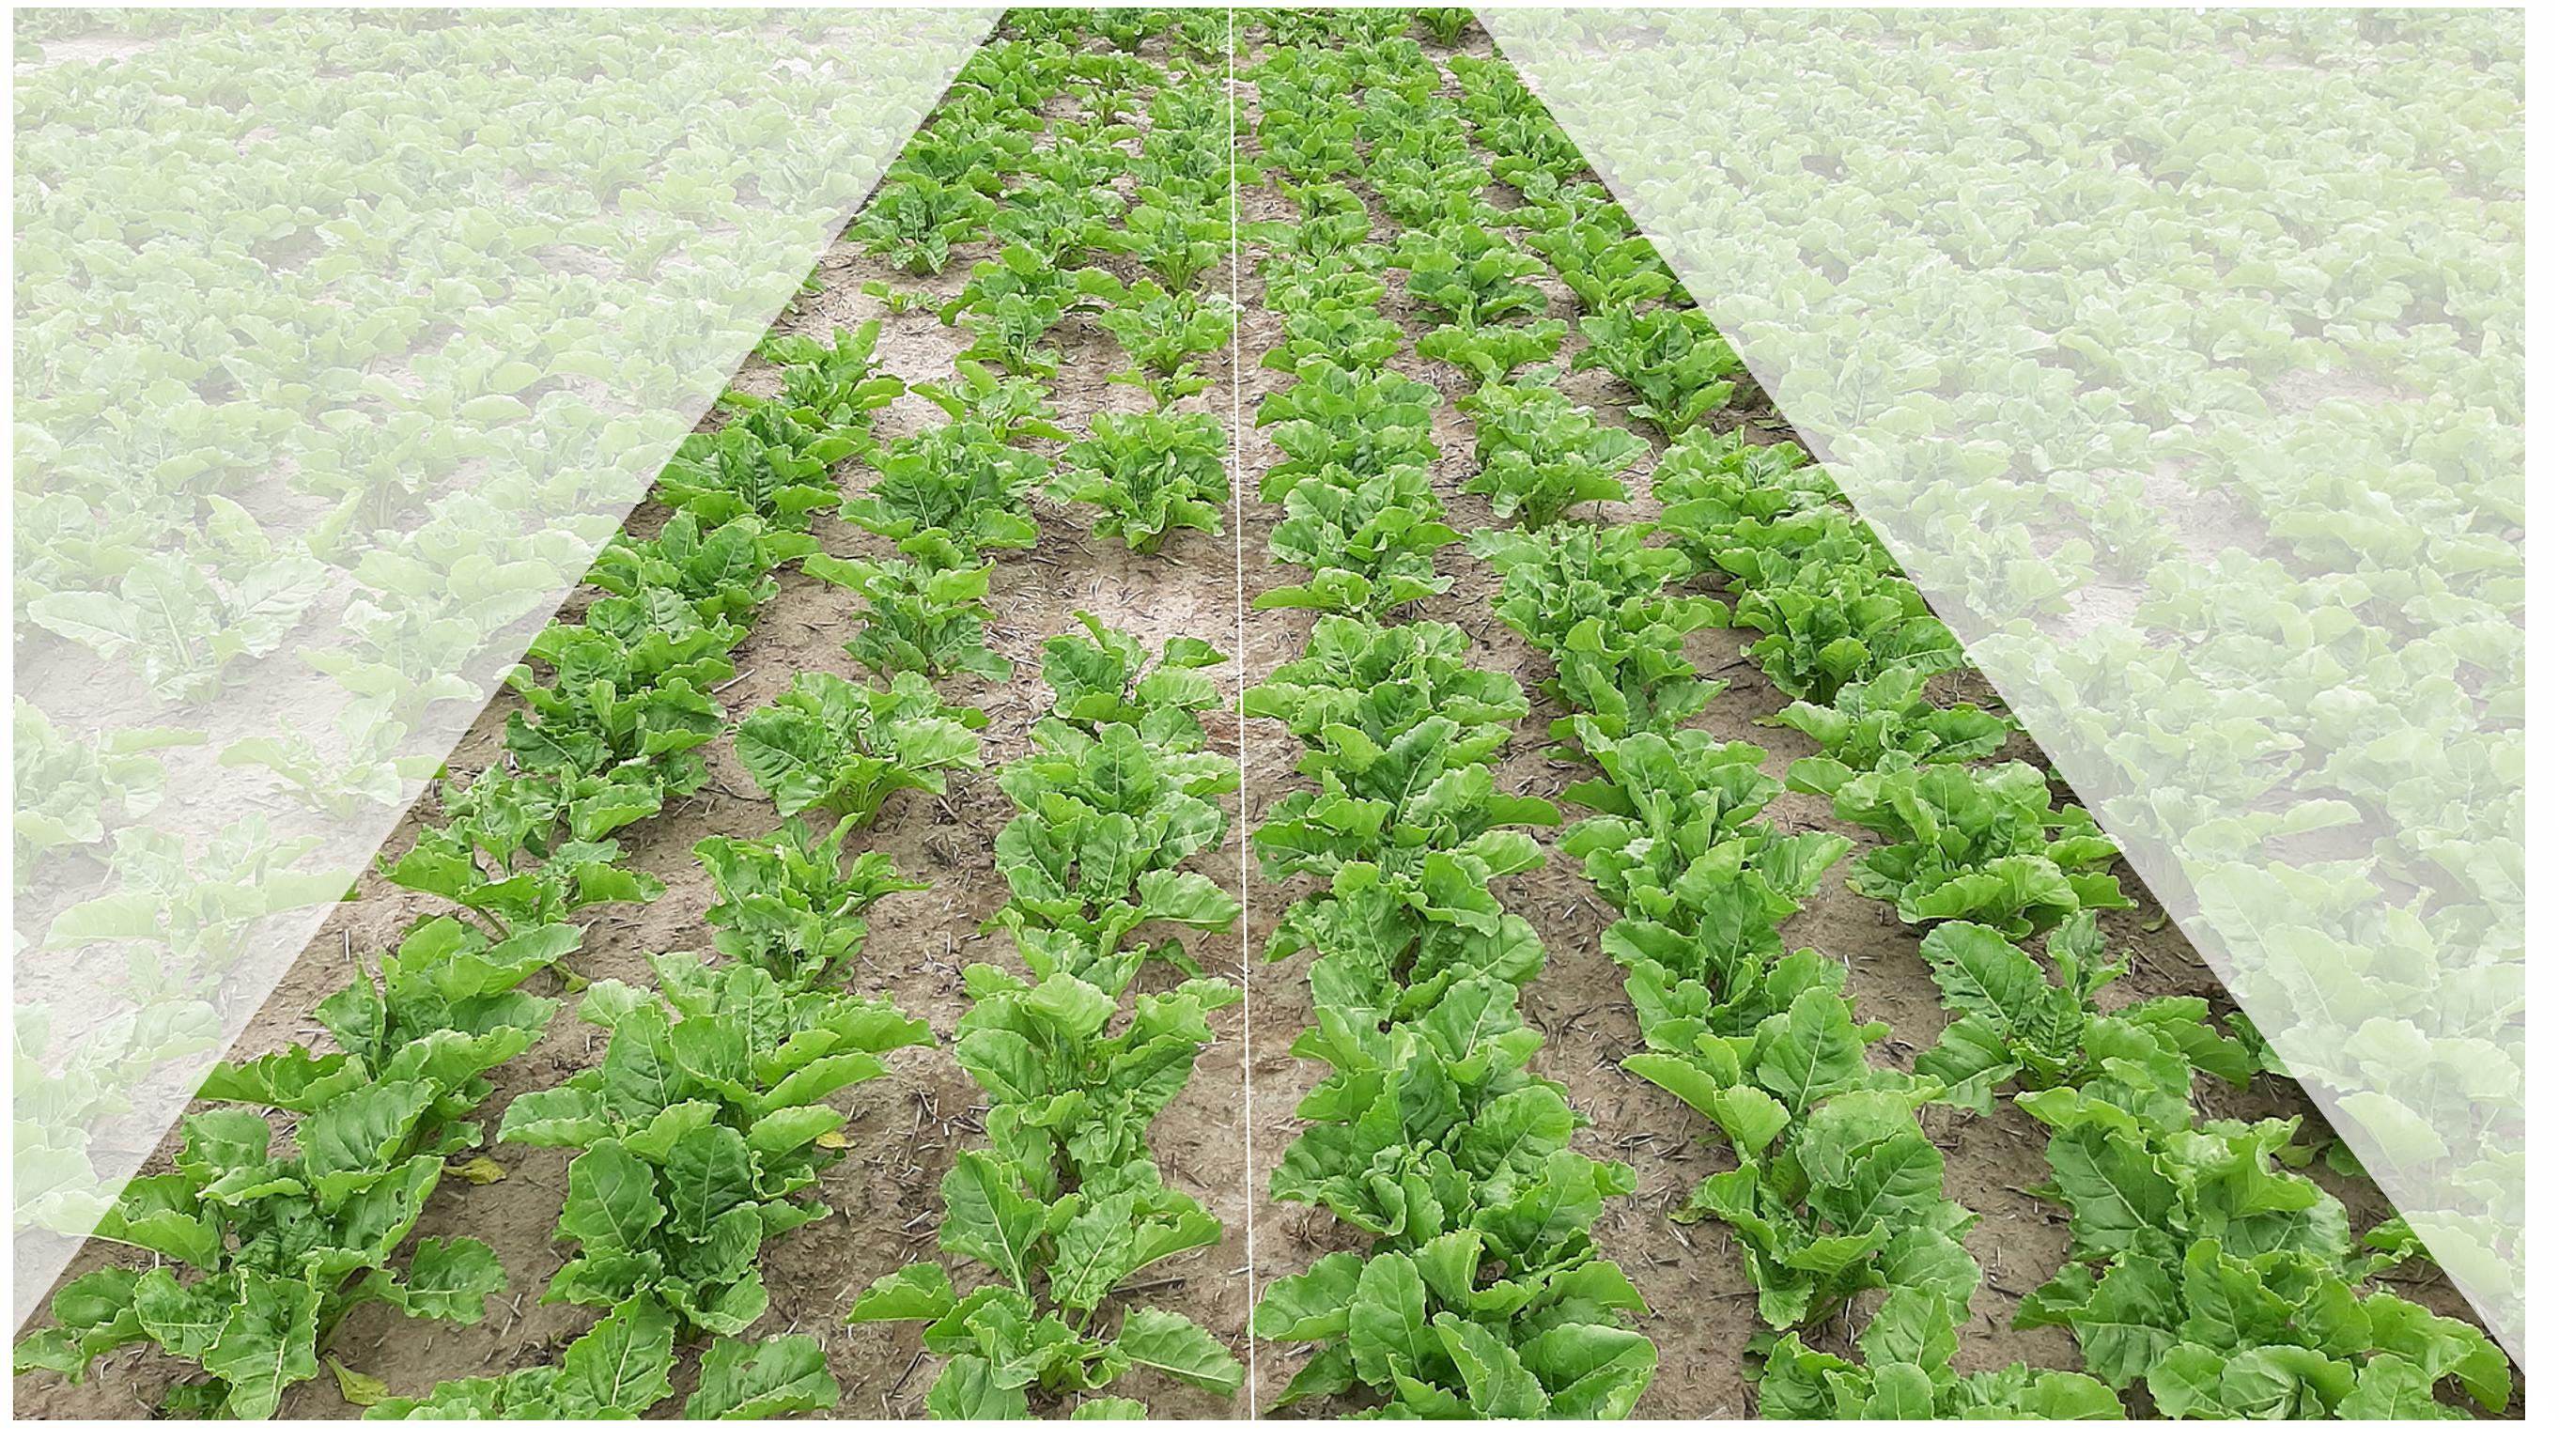 The picture shows a comparison of sugarbeet plants coated with the biological seed dressing (right side) and sugarbeet plants coated with the earlier standard dressing (left side). The additional dressing of the biological growth promoter results in improved juvenile plant development and a more homogeneous emergence of the sugarbeet seedlings in the field.